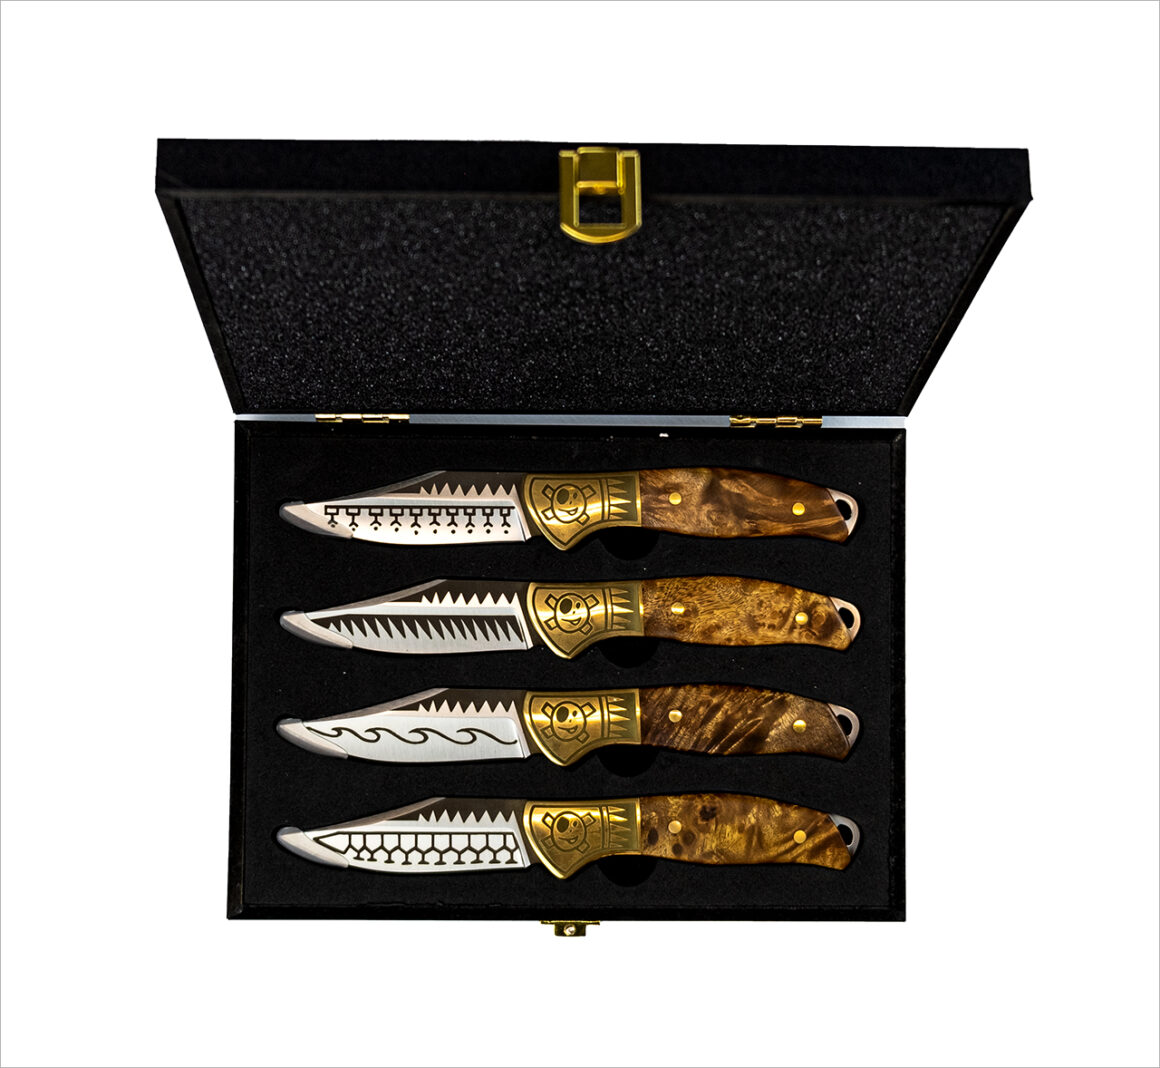 HOMEY’s Tools for Life: the new knife set by Henk Schiffmacher